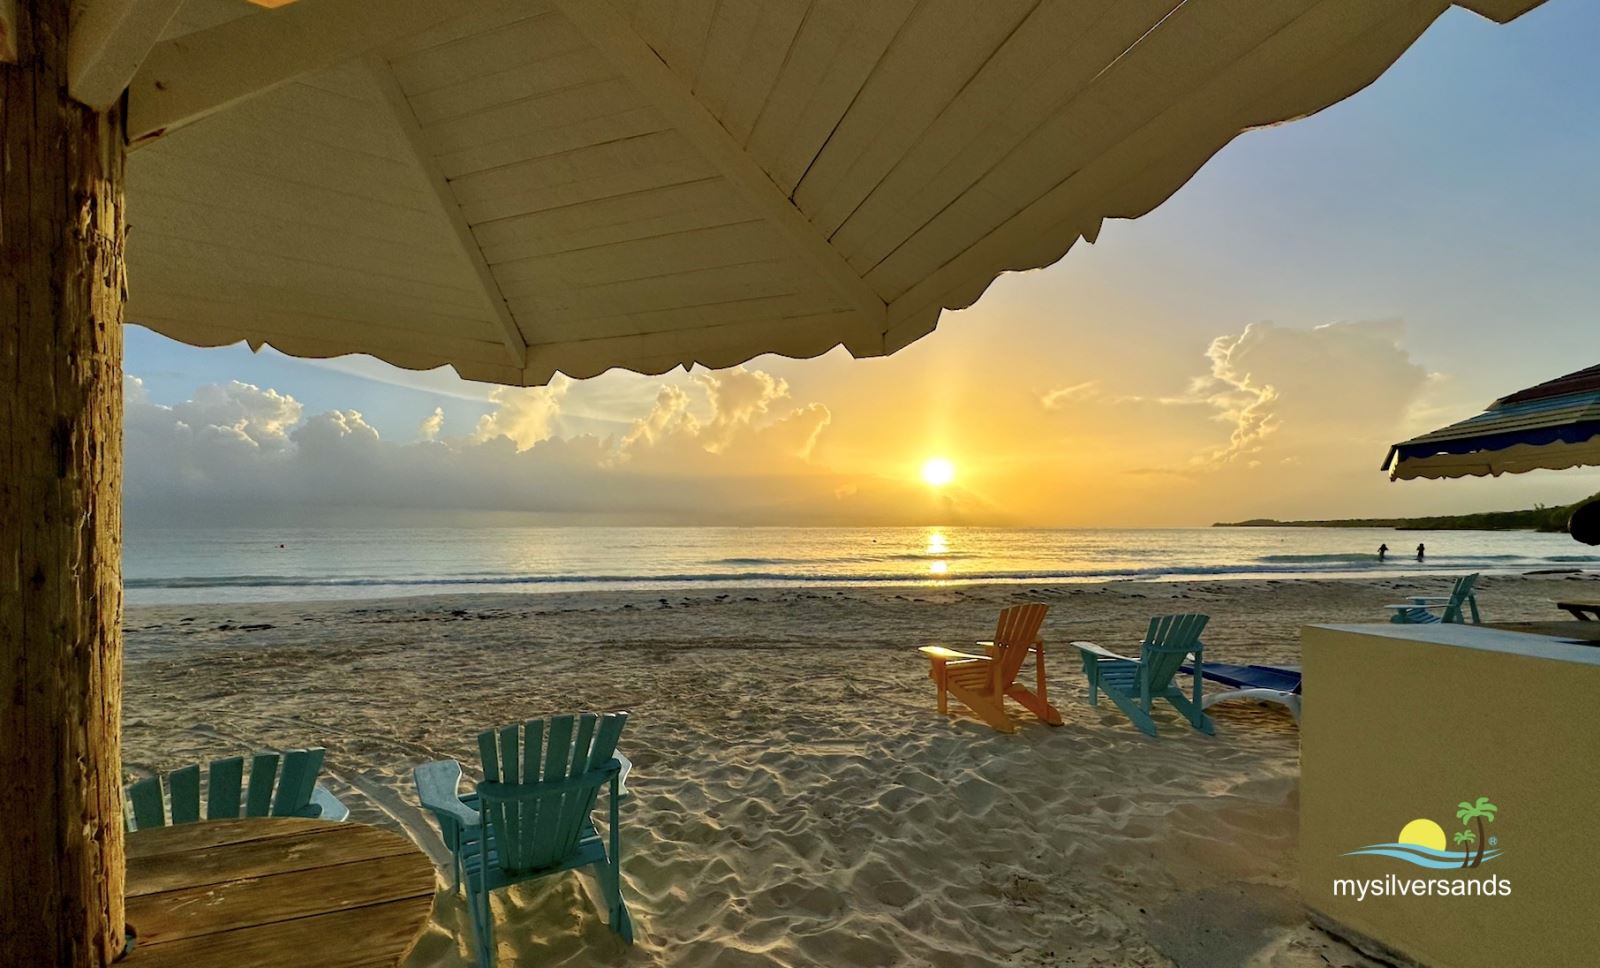 under cabana at sunrise with swimmers